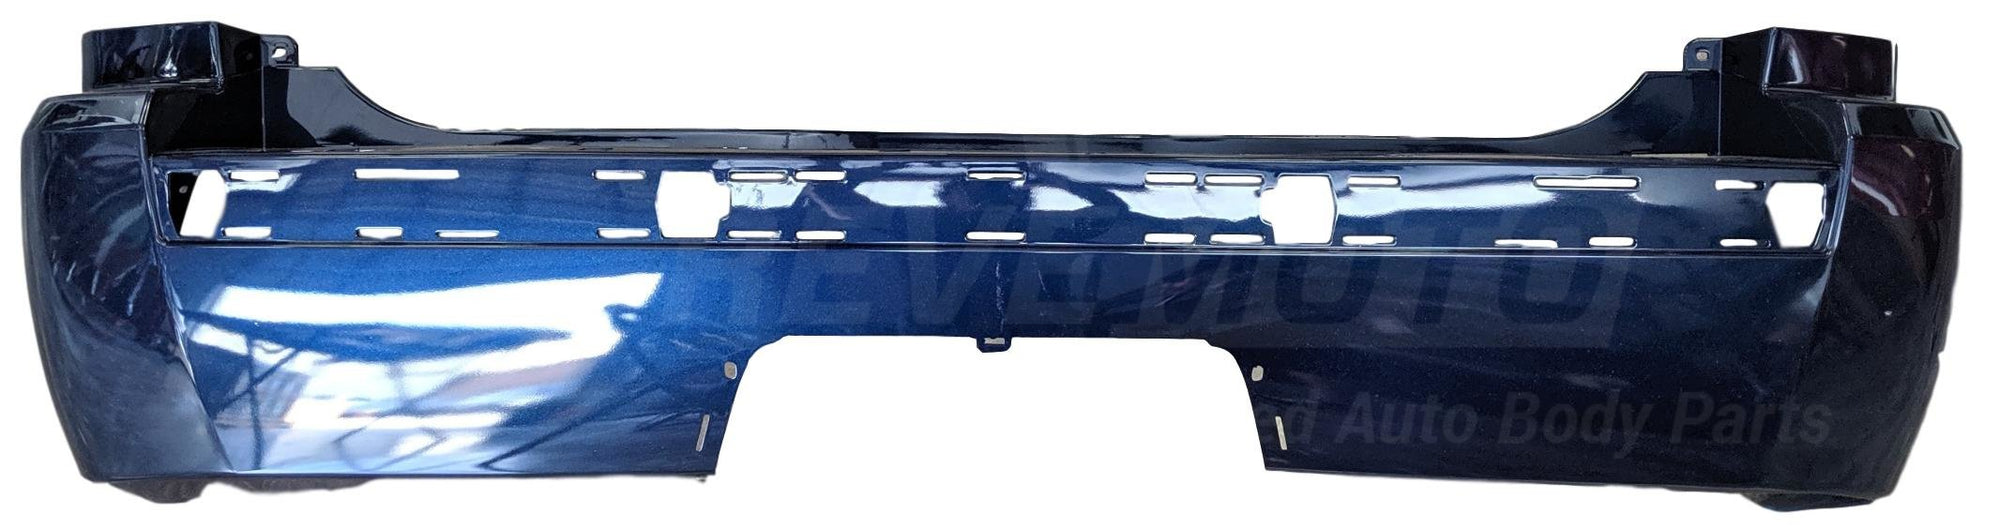 2005 Jeep Grand Cherokee : Rear Bumper Painted